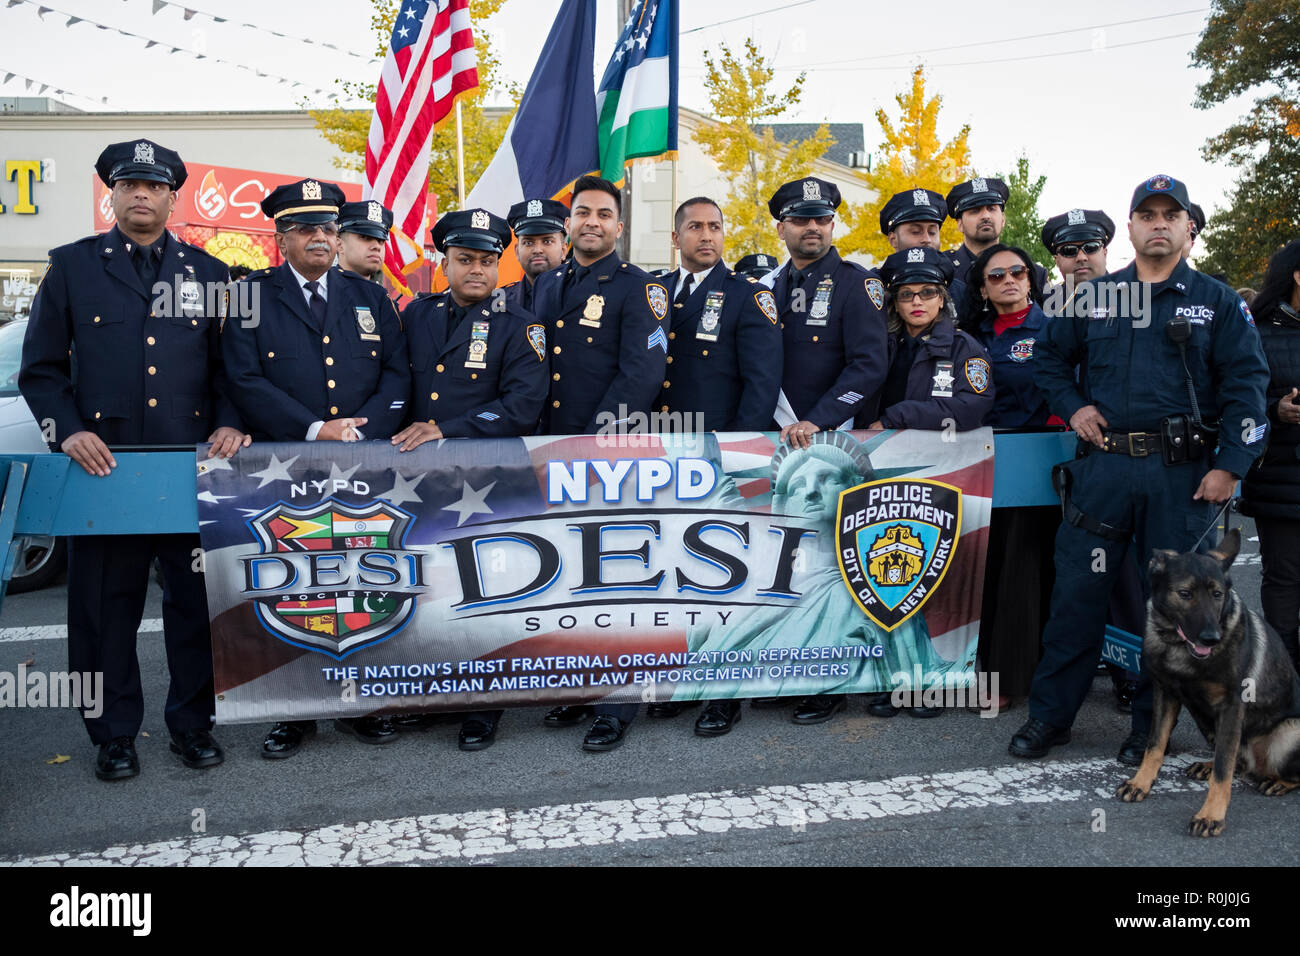 A group of South Asian American policemen, the NYPD DESI SOCIETY pose for a photo at the Diwali celebration in South Richmond Hill, Queens, New York. Stock Photo